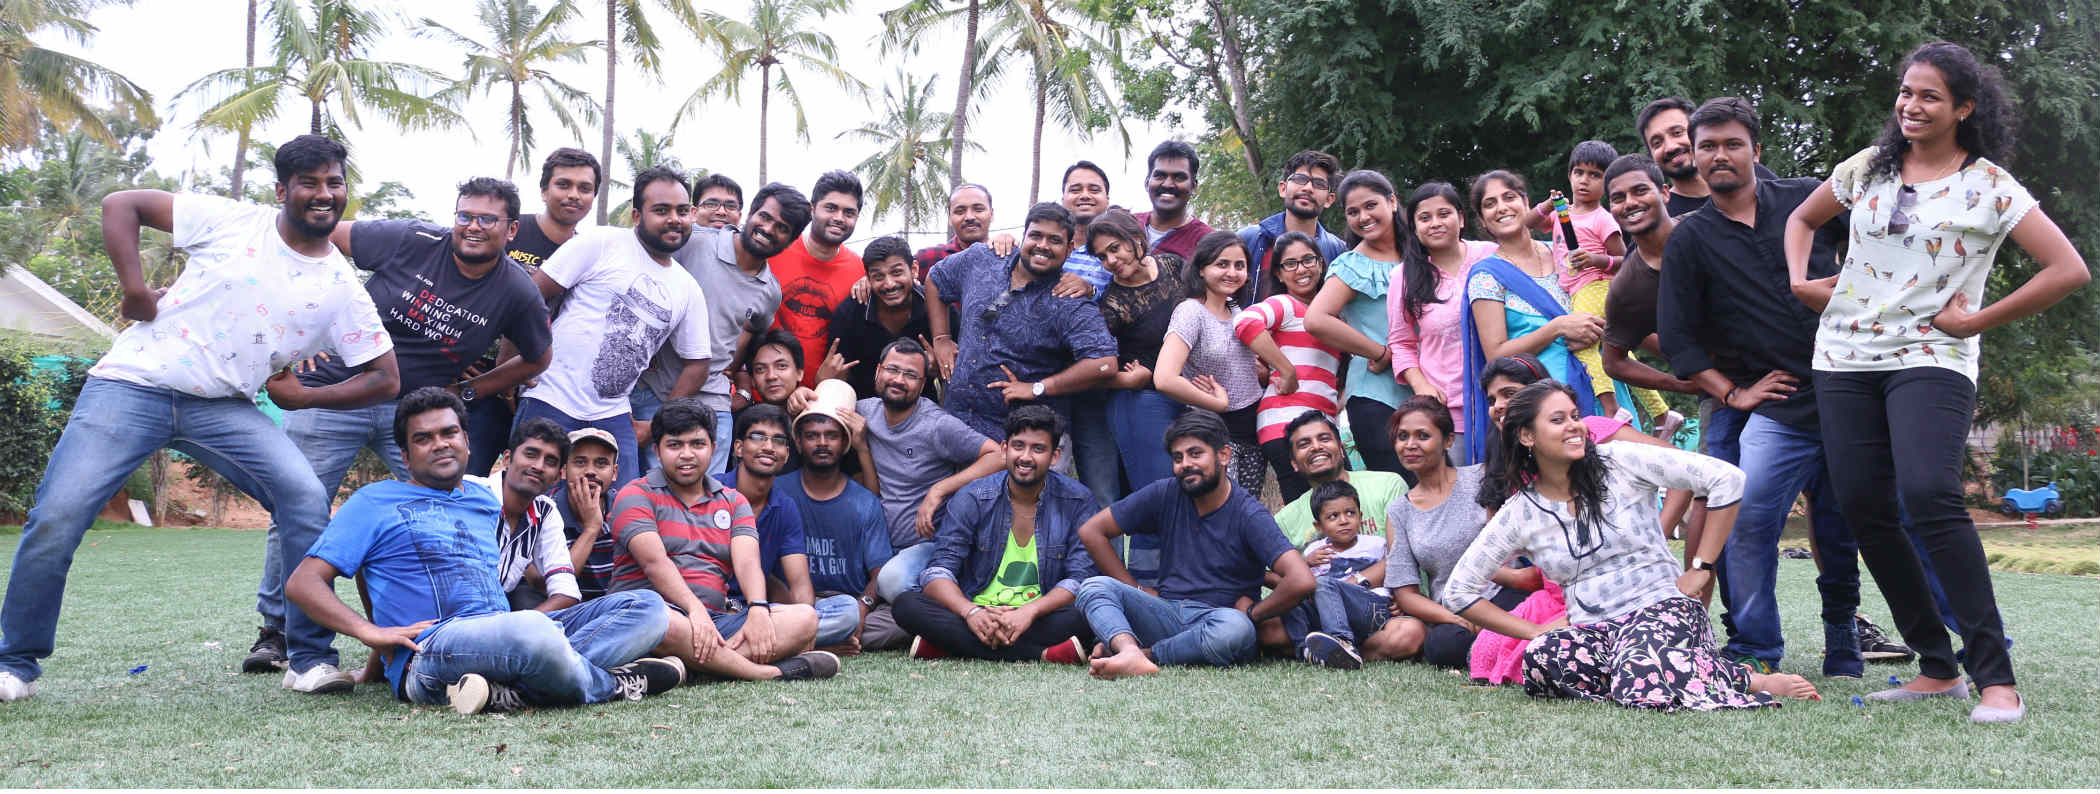 Valuebound’s Awesome Team Outing at Woods Resort, Bangalore